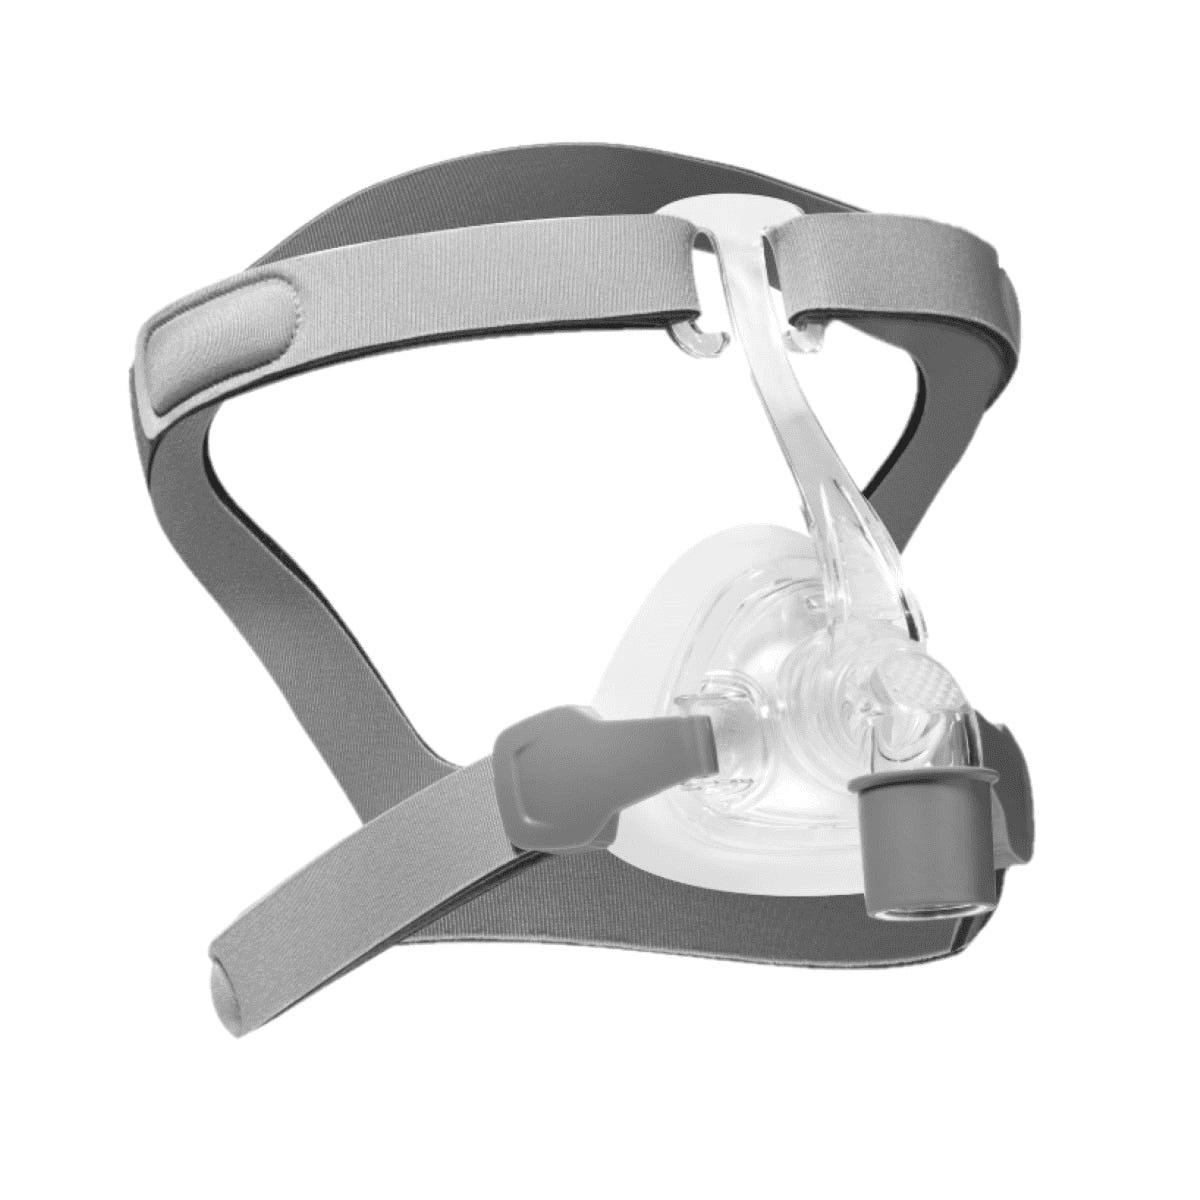 Side view of Viva Nasal Mask with headgear by 3B Medical.